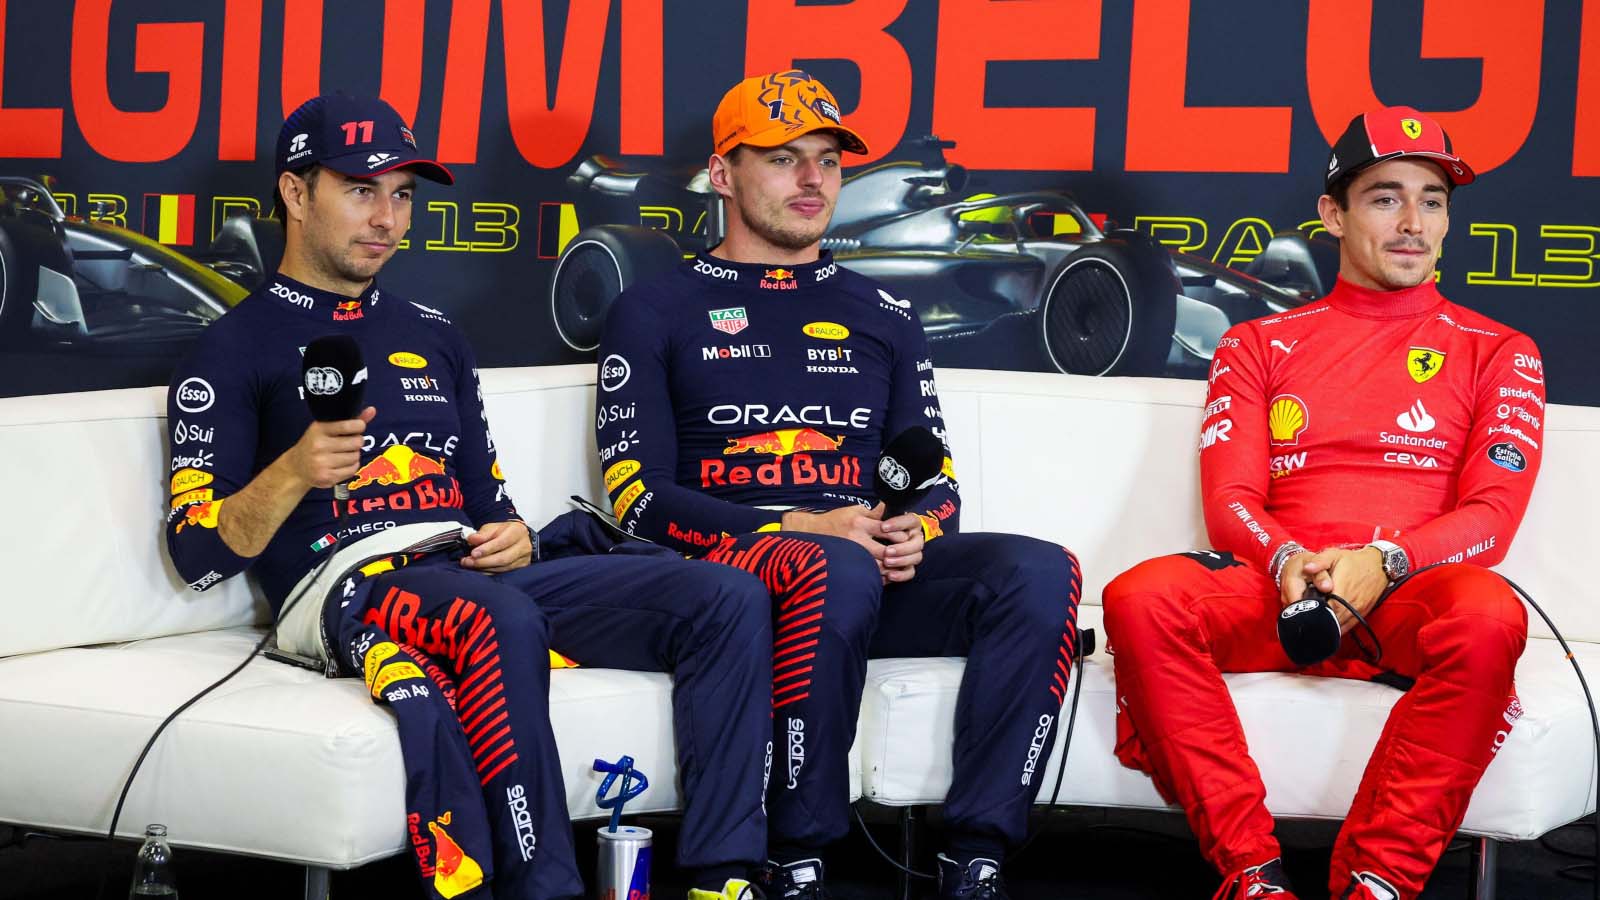 Sergio Perez, Max Verstappen and Charles Leclerc in the press conference.